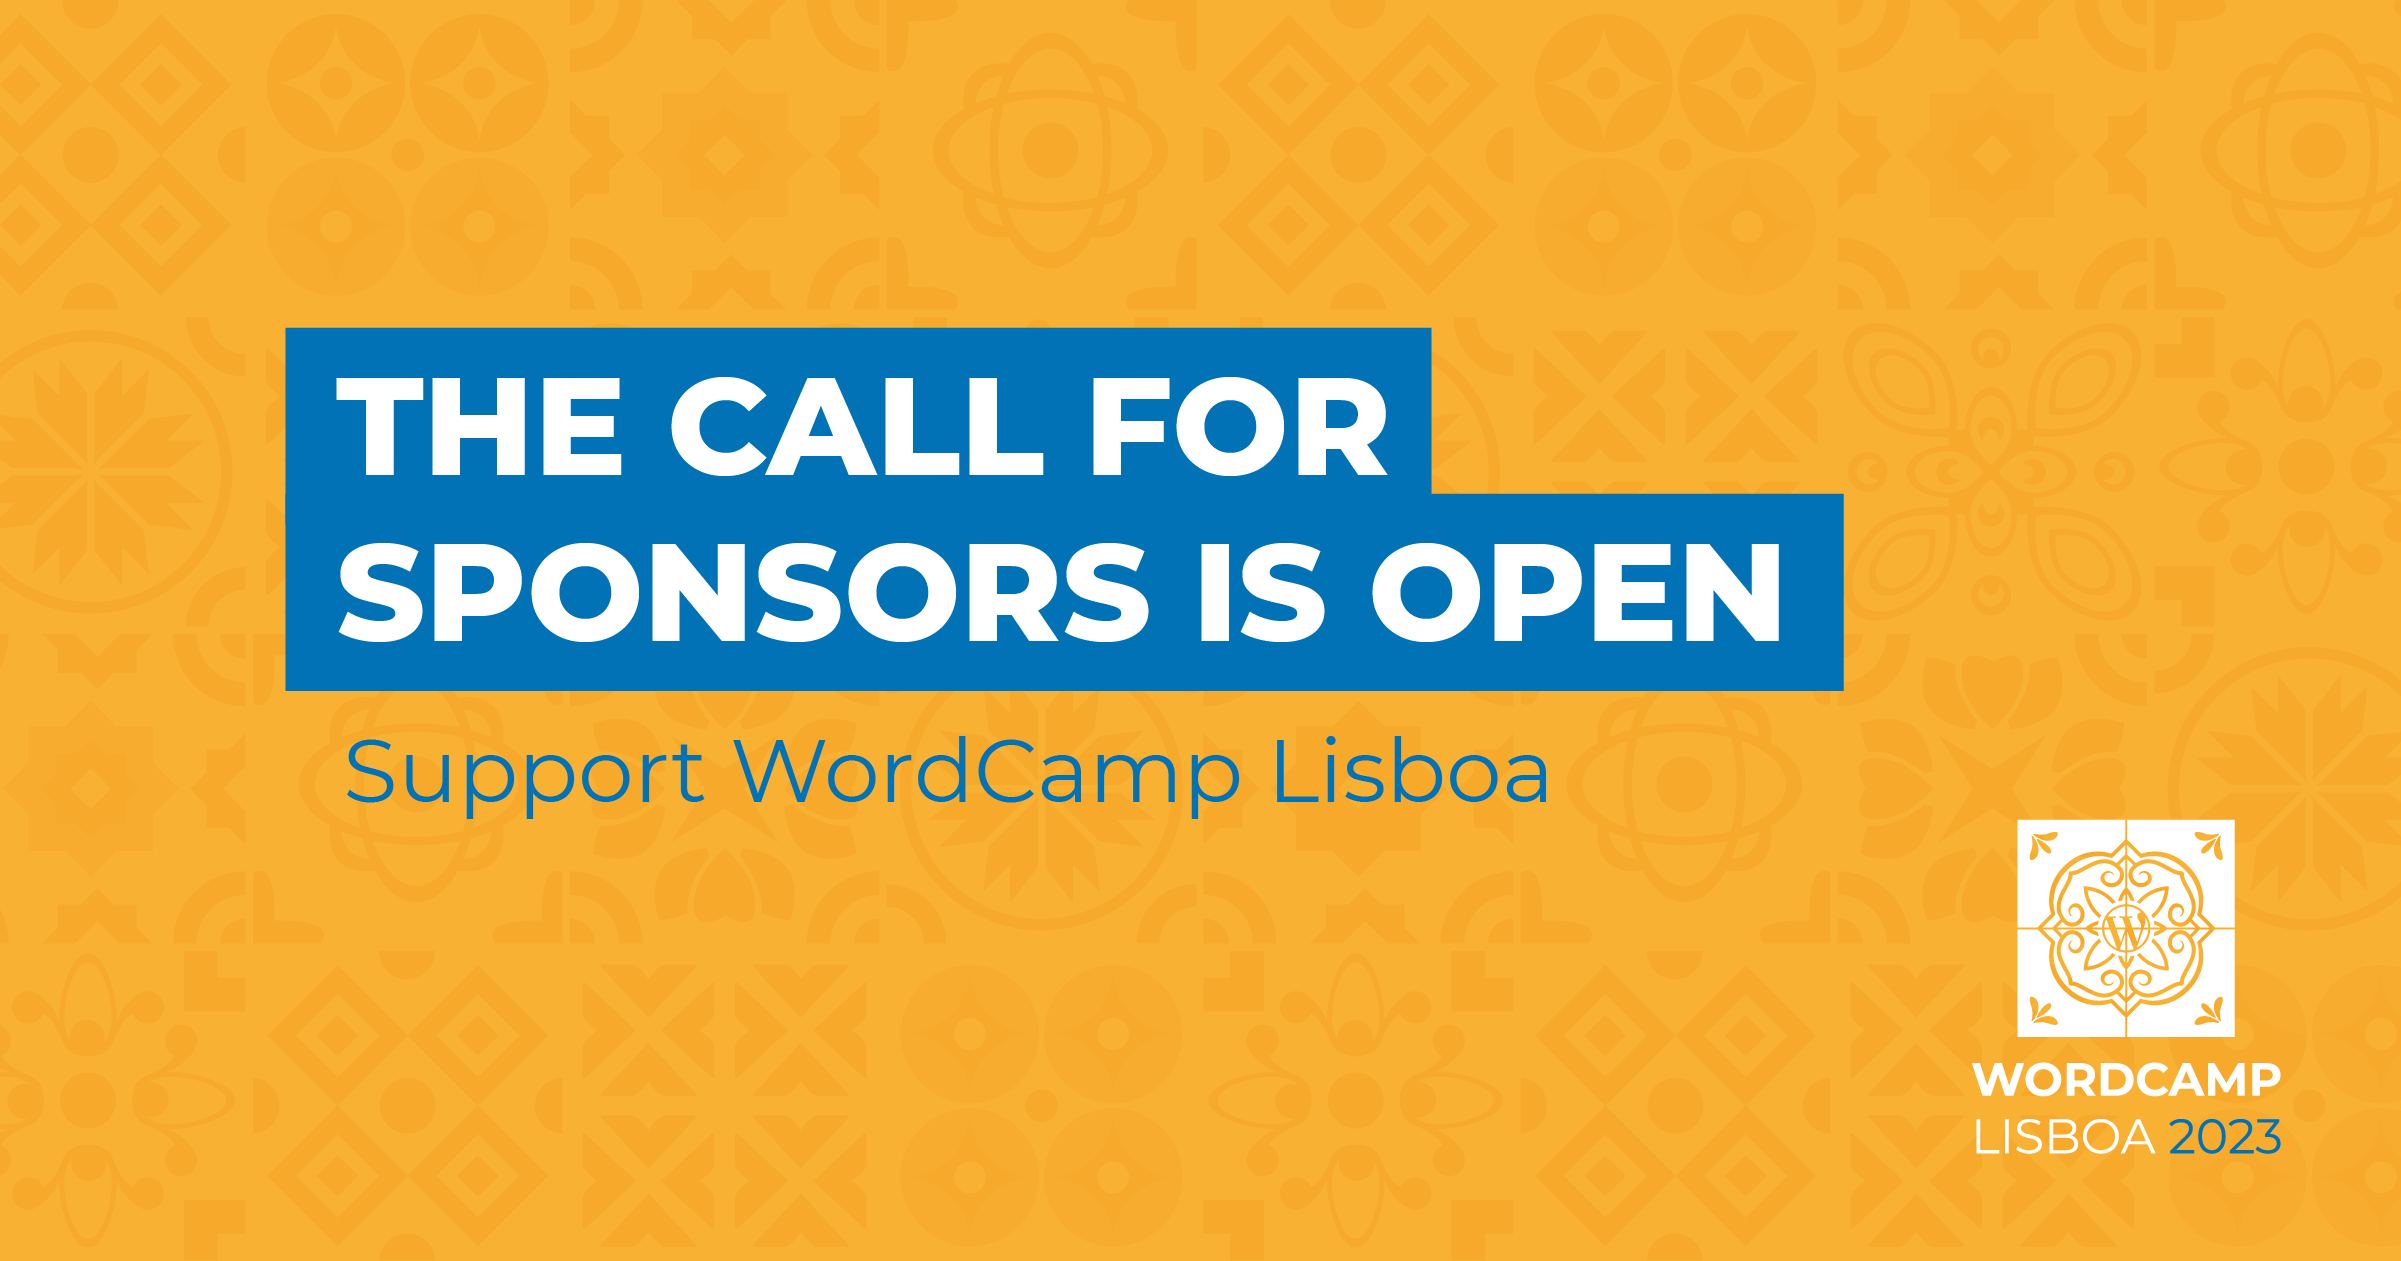 The Call for Sponsors is open – Support WordCamp Lisboa